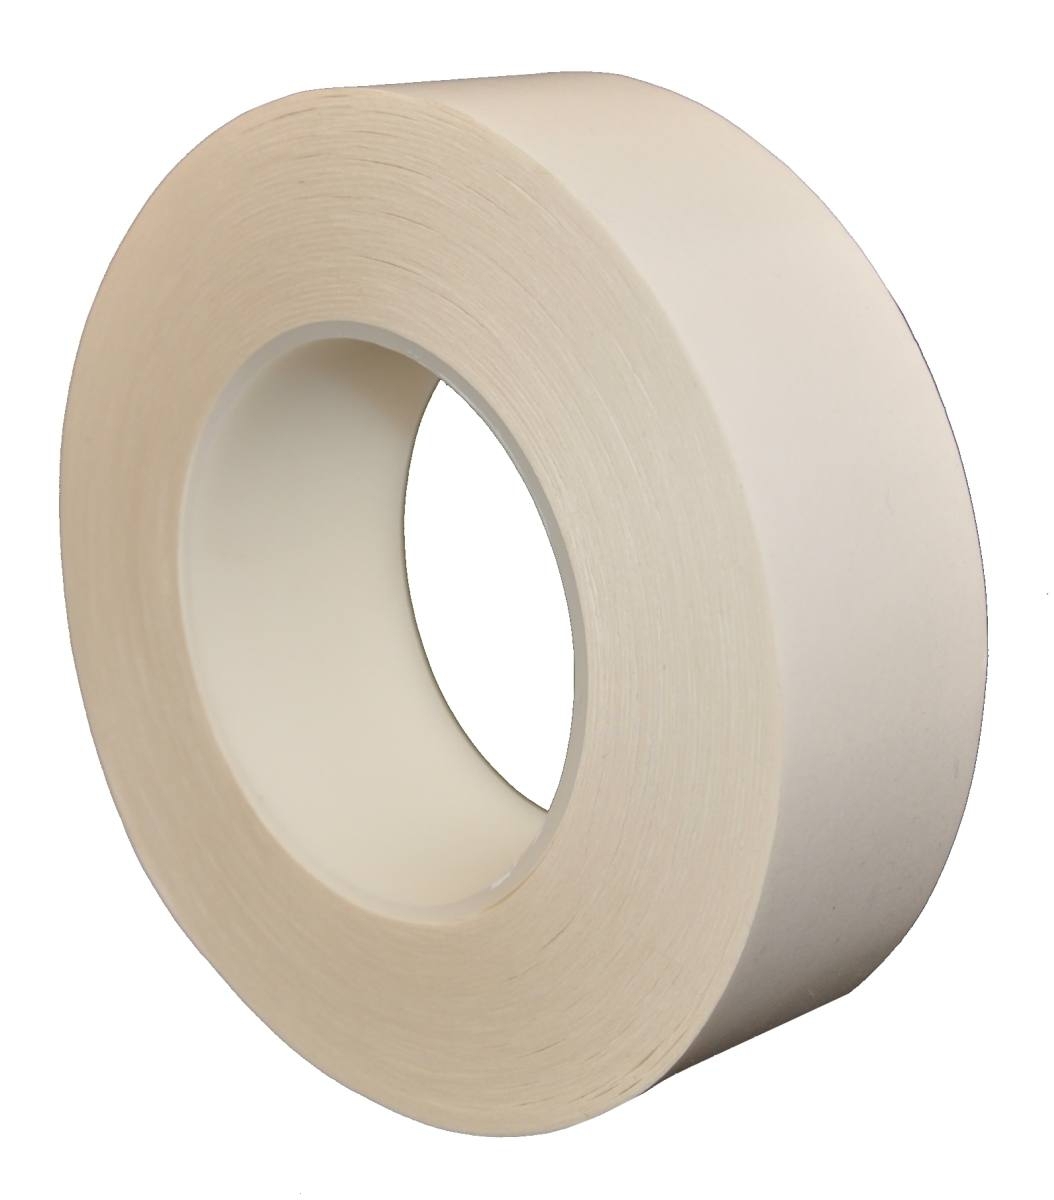 SKS silicone paper release liner, 75mmx150m, coated with glassine on both sides, white